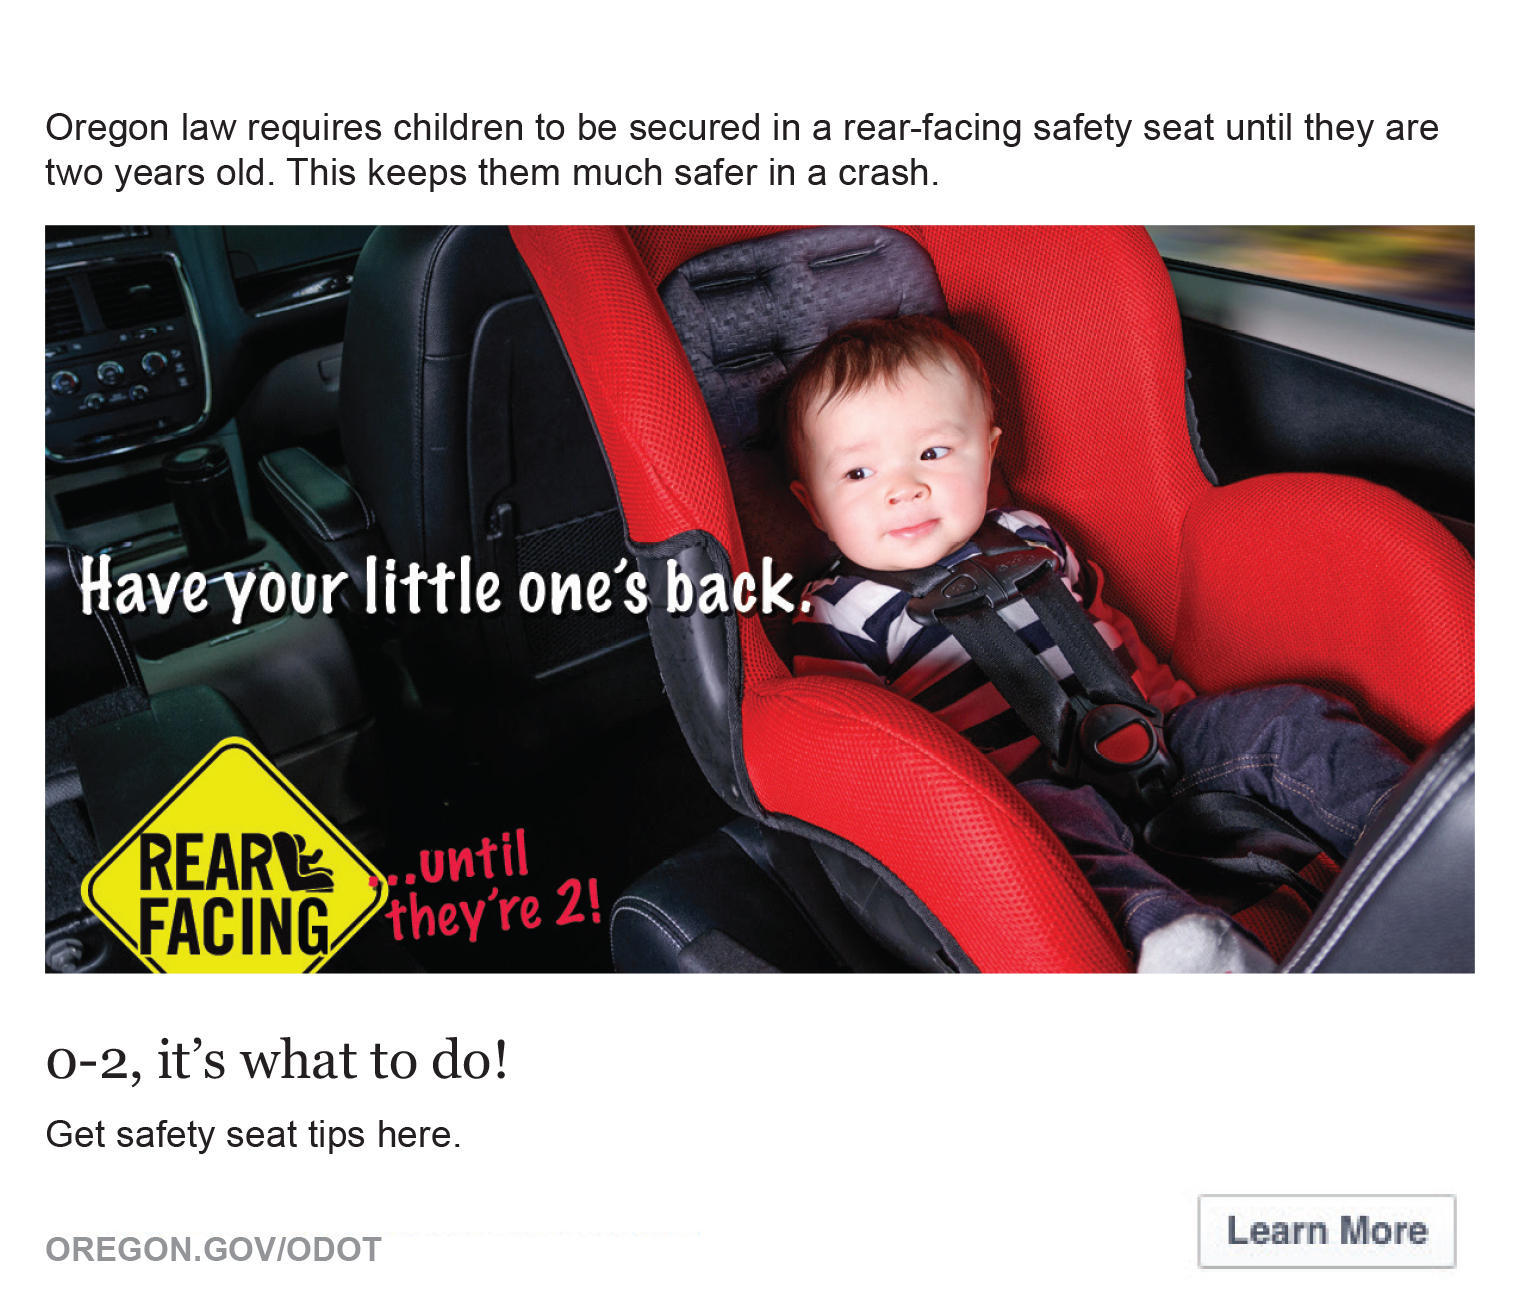 Image of a baby boy sitting in a rear facing car seat